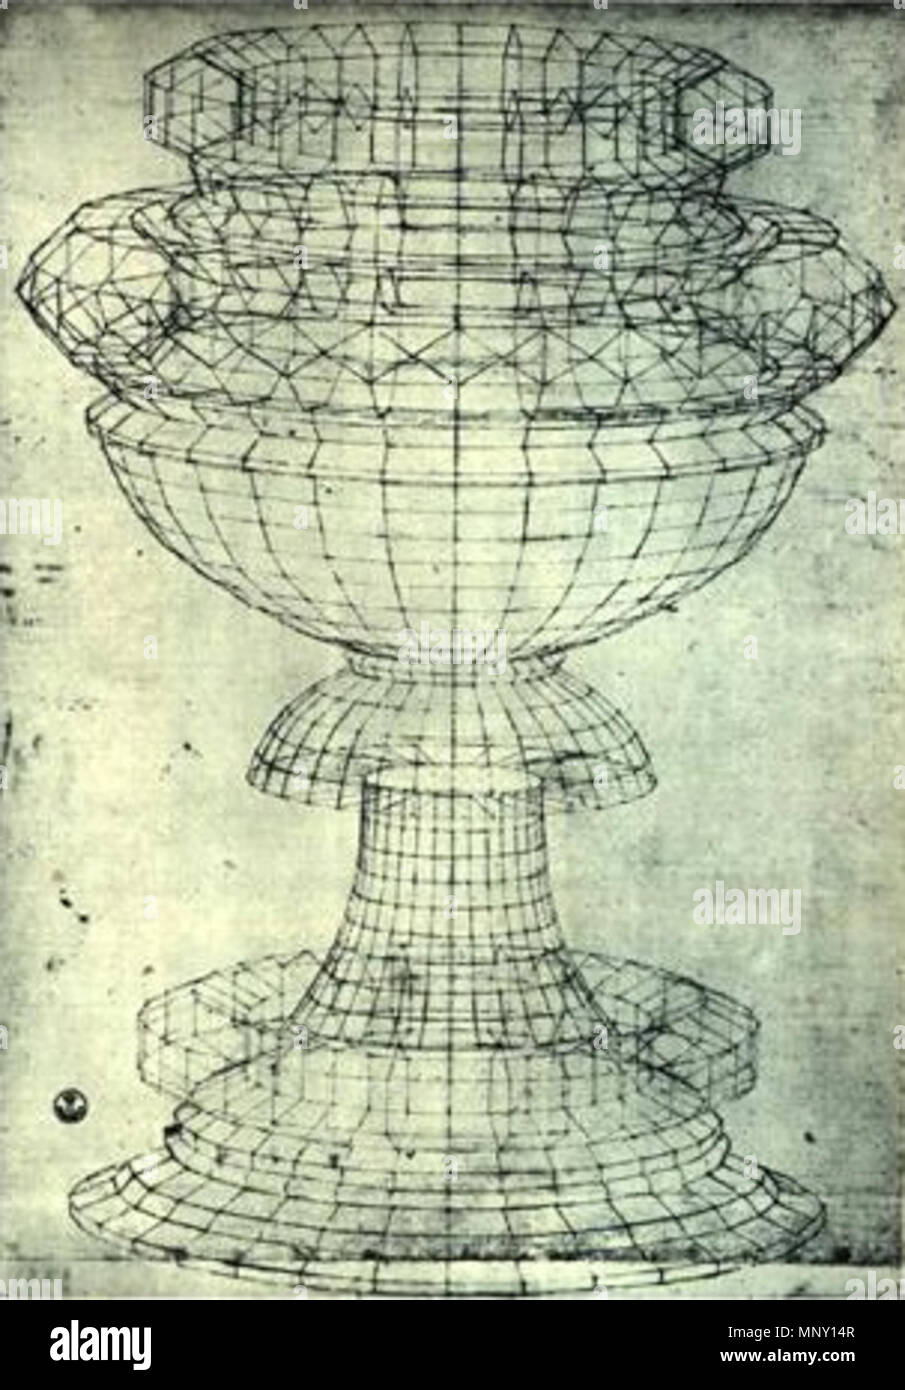 . Perspective Study of a Chalice, pen and ink on paper, 29 x 24.5 cm, Gabinetto dei Disegni, Uffizi, Florence, Italy. 15th century.   Paolo Uccello  (1397–1475)     Alternative names Paolo di Dono; Paolo Di Dono Uccello; Uccello; Paolo di Dono Uccello; Paolo Di Dono; paolo ucello; Paul Uccello  Description painter  Date of birth/death circa 1397 10 December 1475  Location of birth/death Florence Florence  Work location Florence, Venice, Urbino  Authority control  : Q192488 VIAF: 316406287 ISNI: 0000 0001 2128 8320 ULAN: 500003110 LCCN: n86140444 NLA: 36315613 WorldCat 1211 Uccello, Paolo - Per Stock Photo